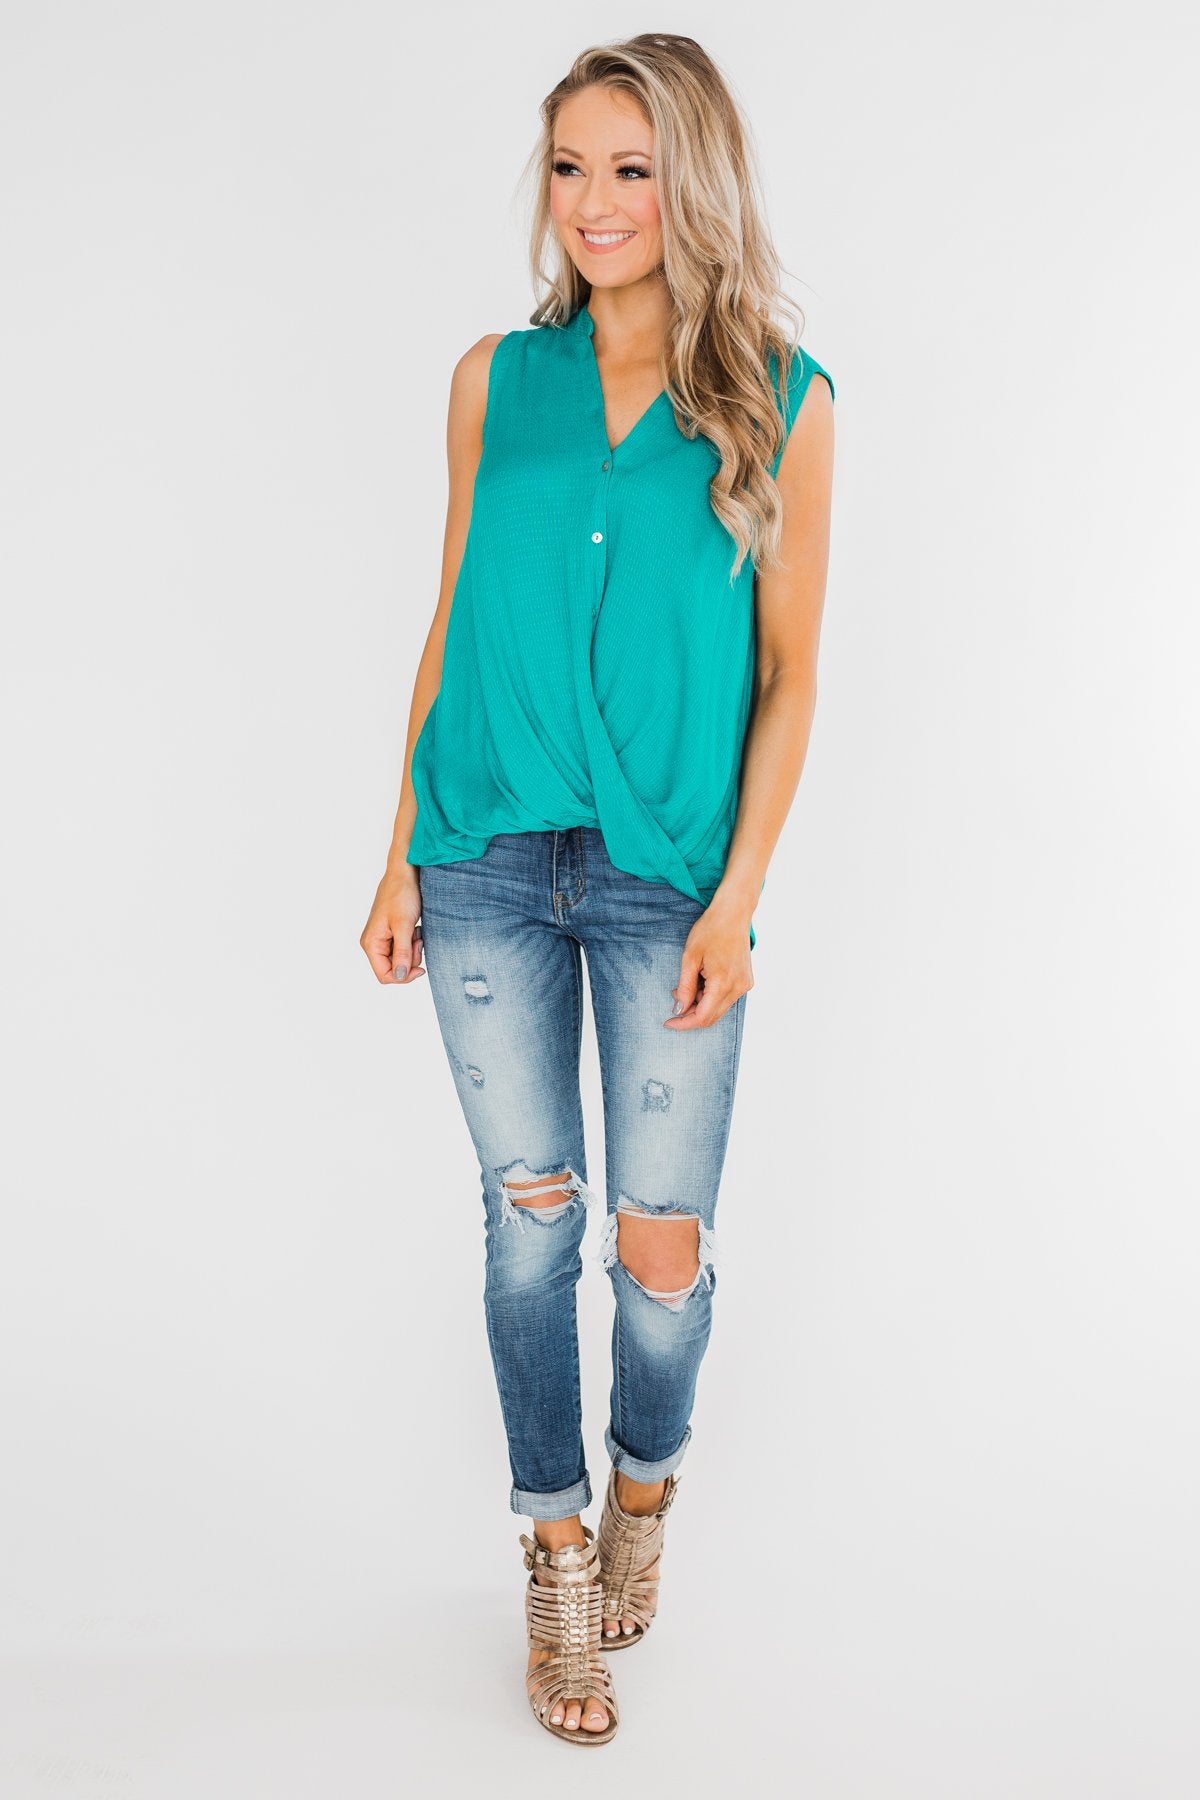 Anywhere With You Twist Tank Top- Turquoise